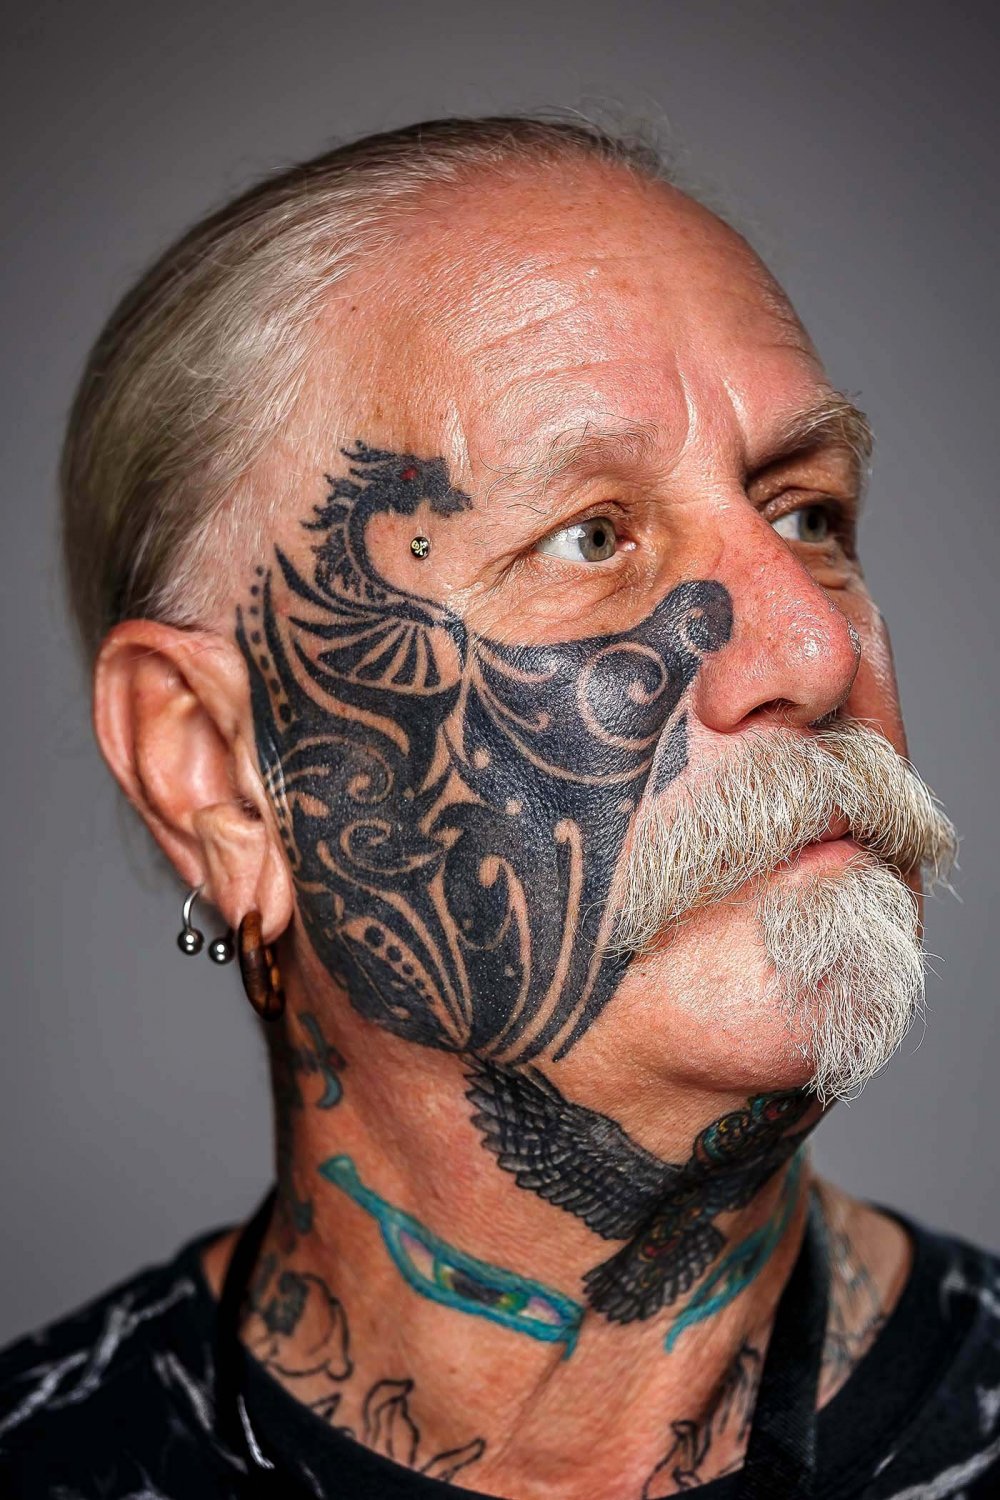 The most striking examples of tattoos are Tattoo Mania Expo & raquo;